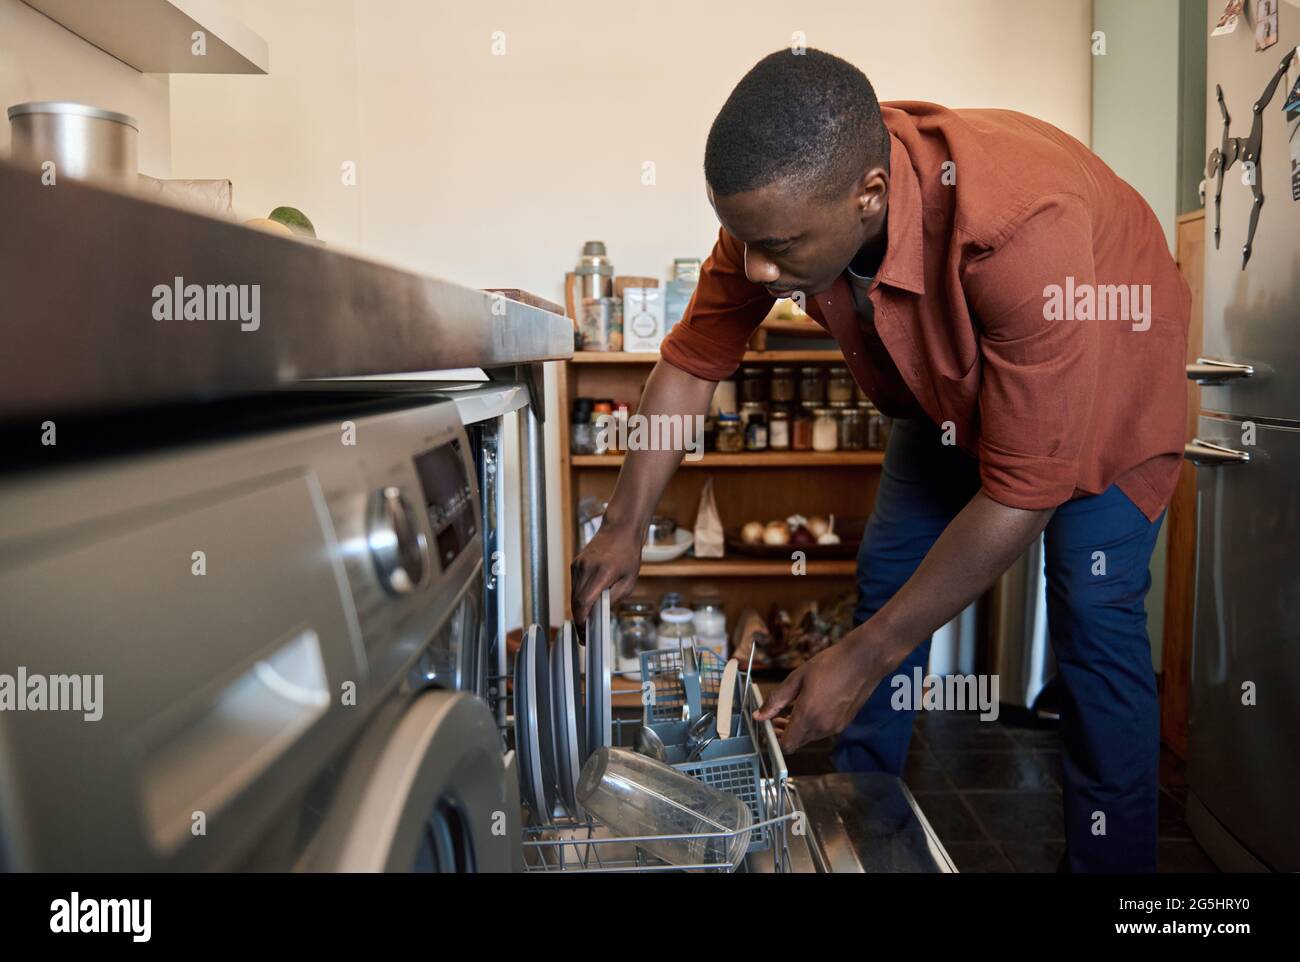 Young African man putting plates in his dishwasher at home Stock Photo